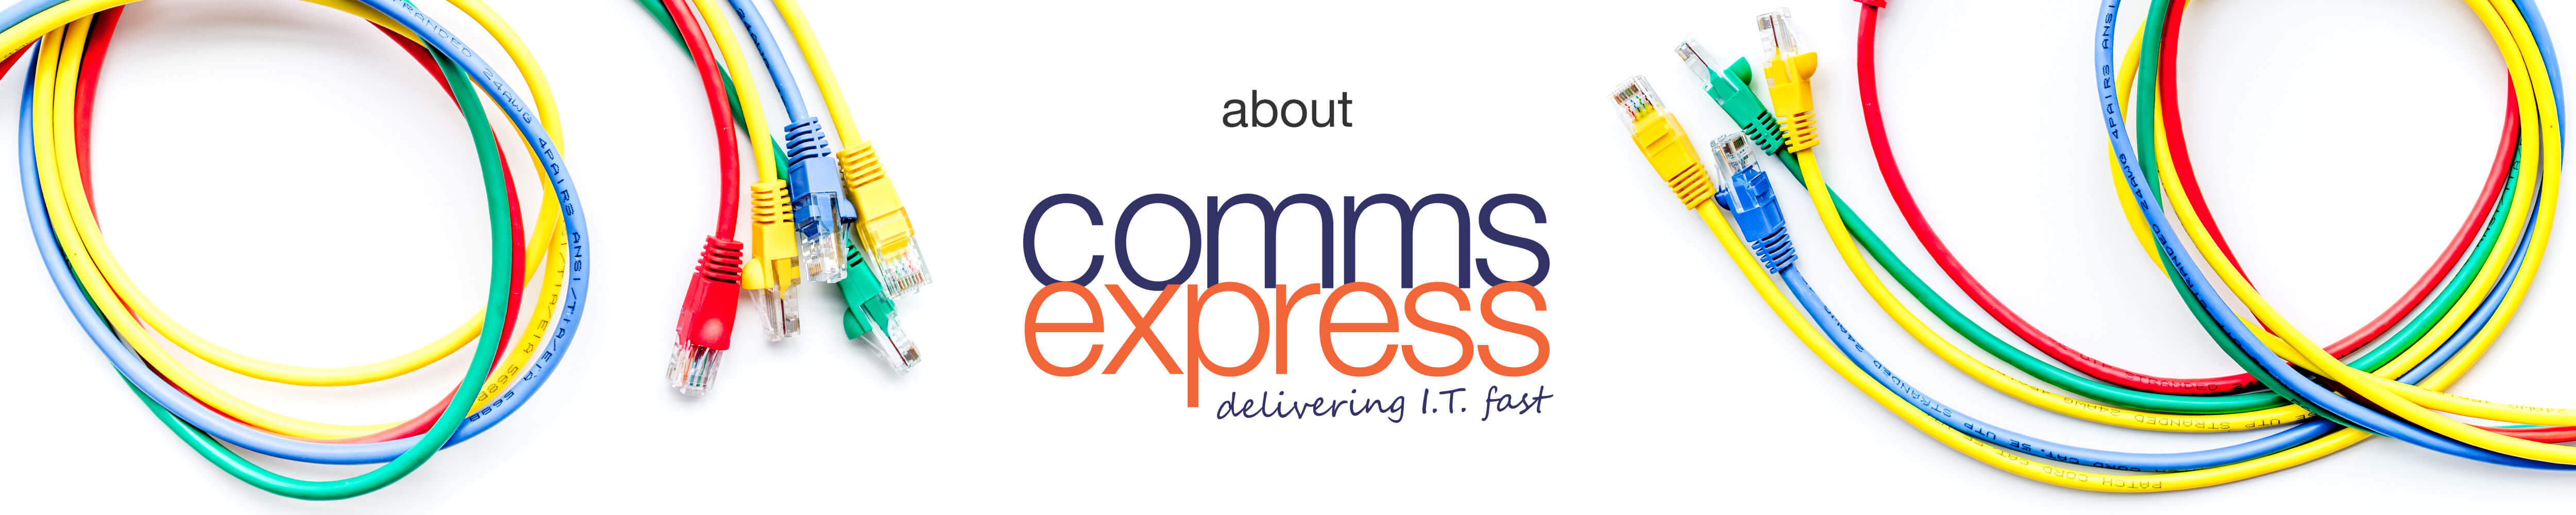 About Comms Express